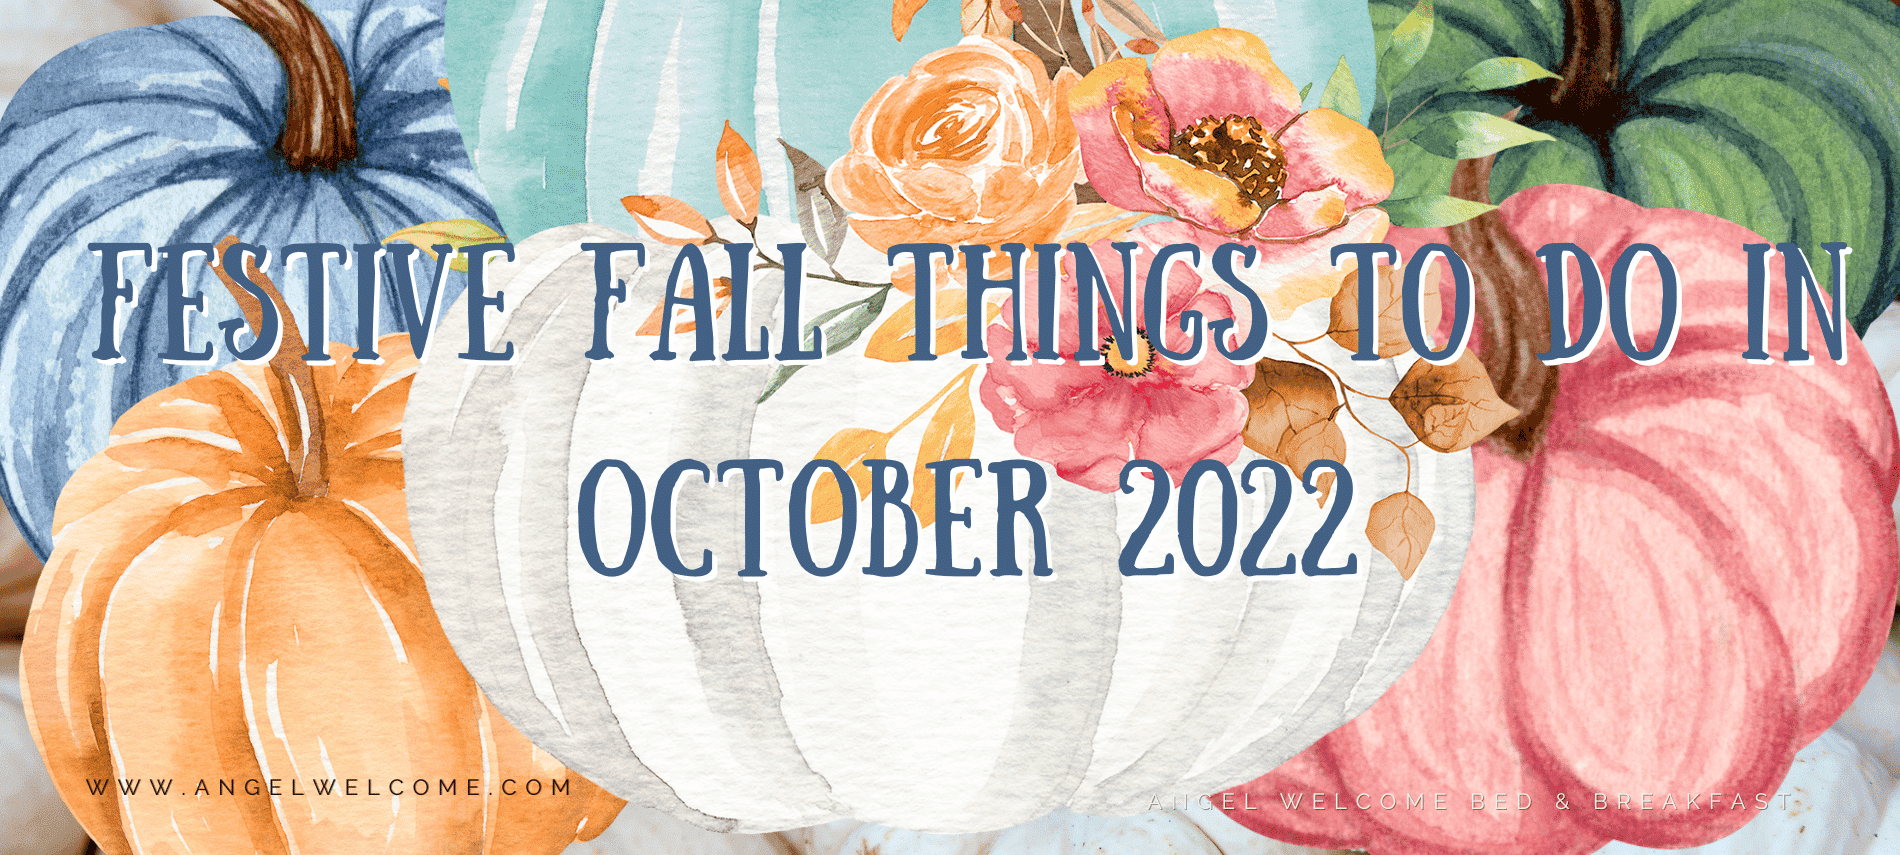 Pretty pastel Pumpkins with text overlay: Festive Fall Things To Do in October 2022